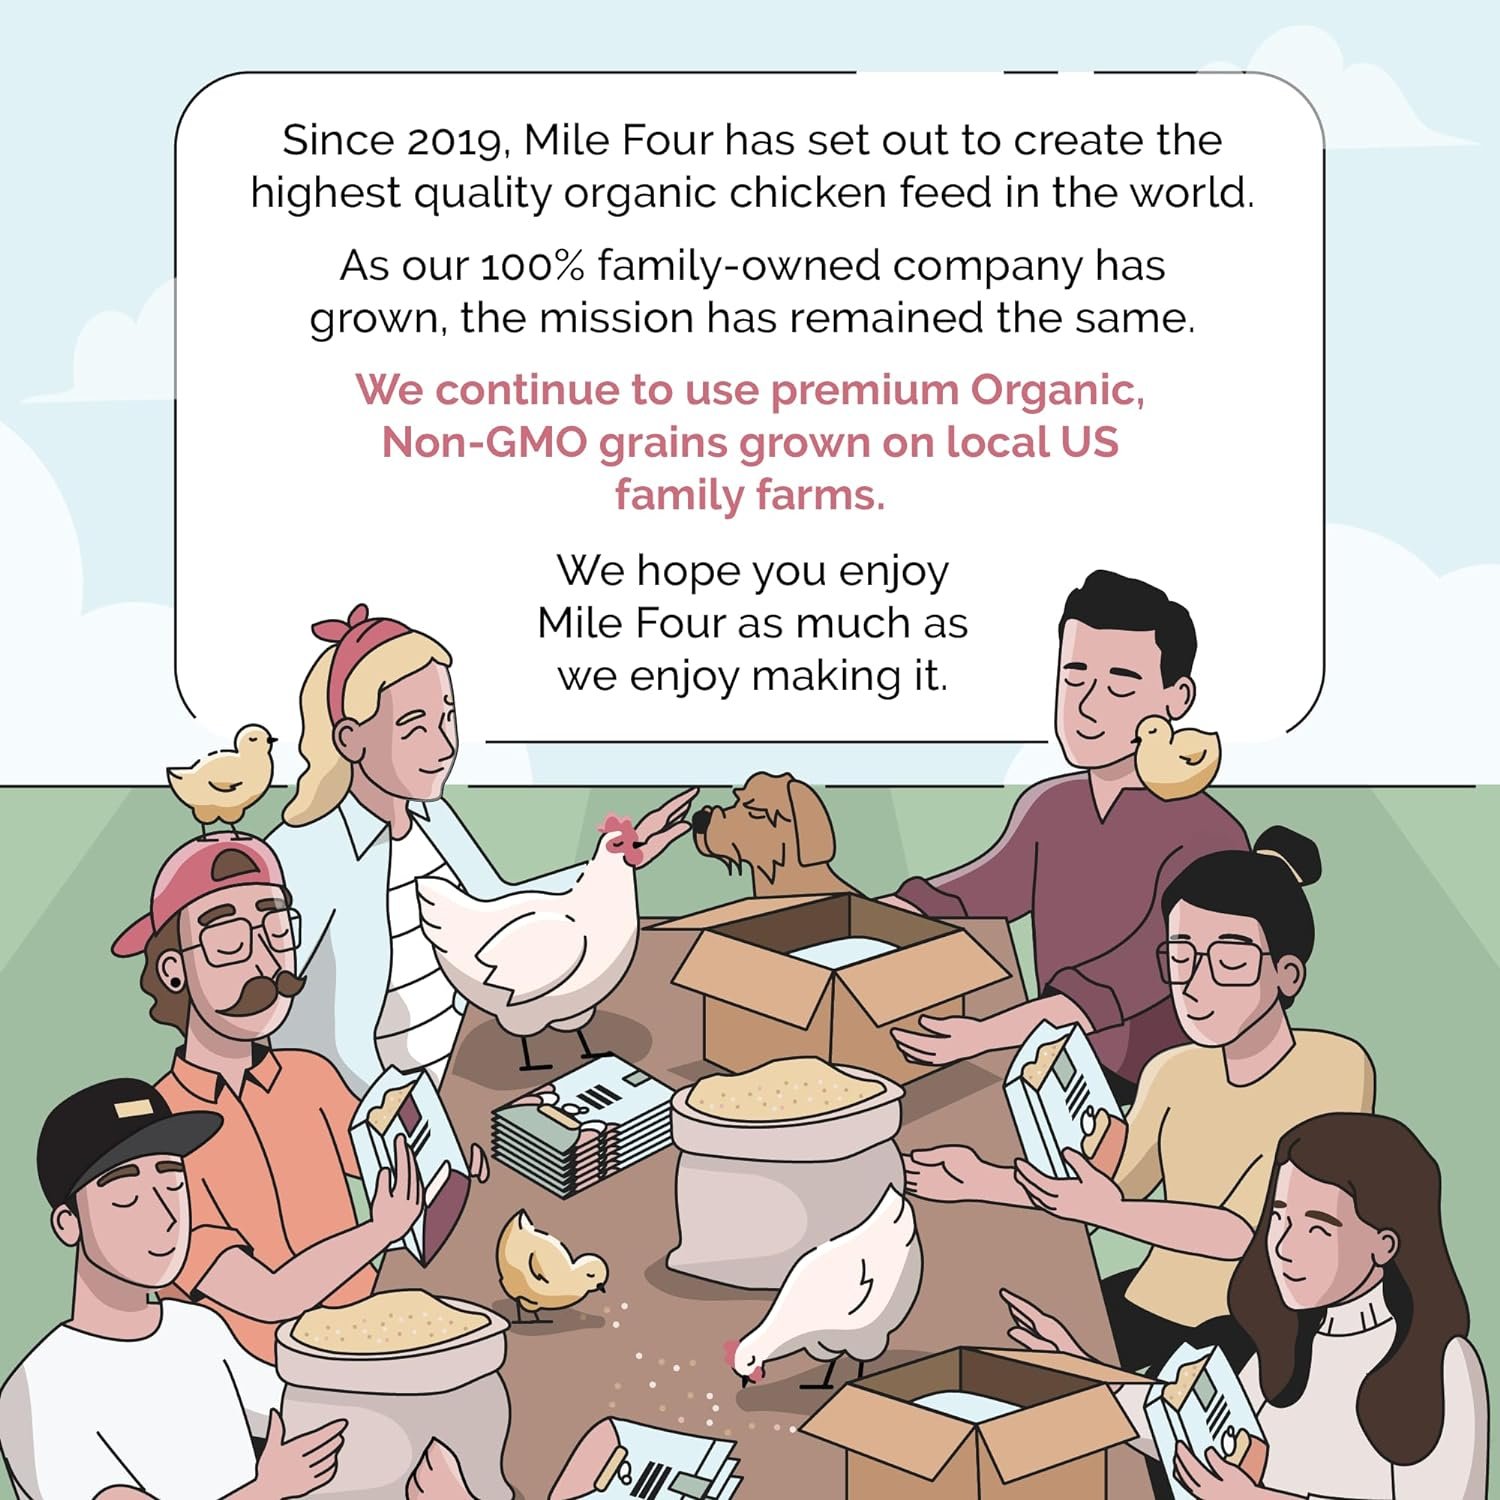 Mile Four | Layer Chicken Feed | Organic | Non-GMO, Corn-Free, Soy-Free, Non-Medicated Poultry Food | USA Grown | 16% Protein | Whole Grain | 46 lbs.